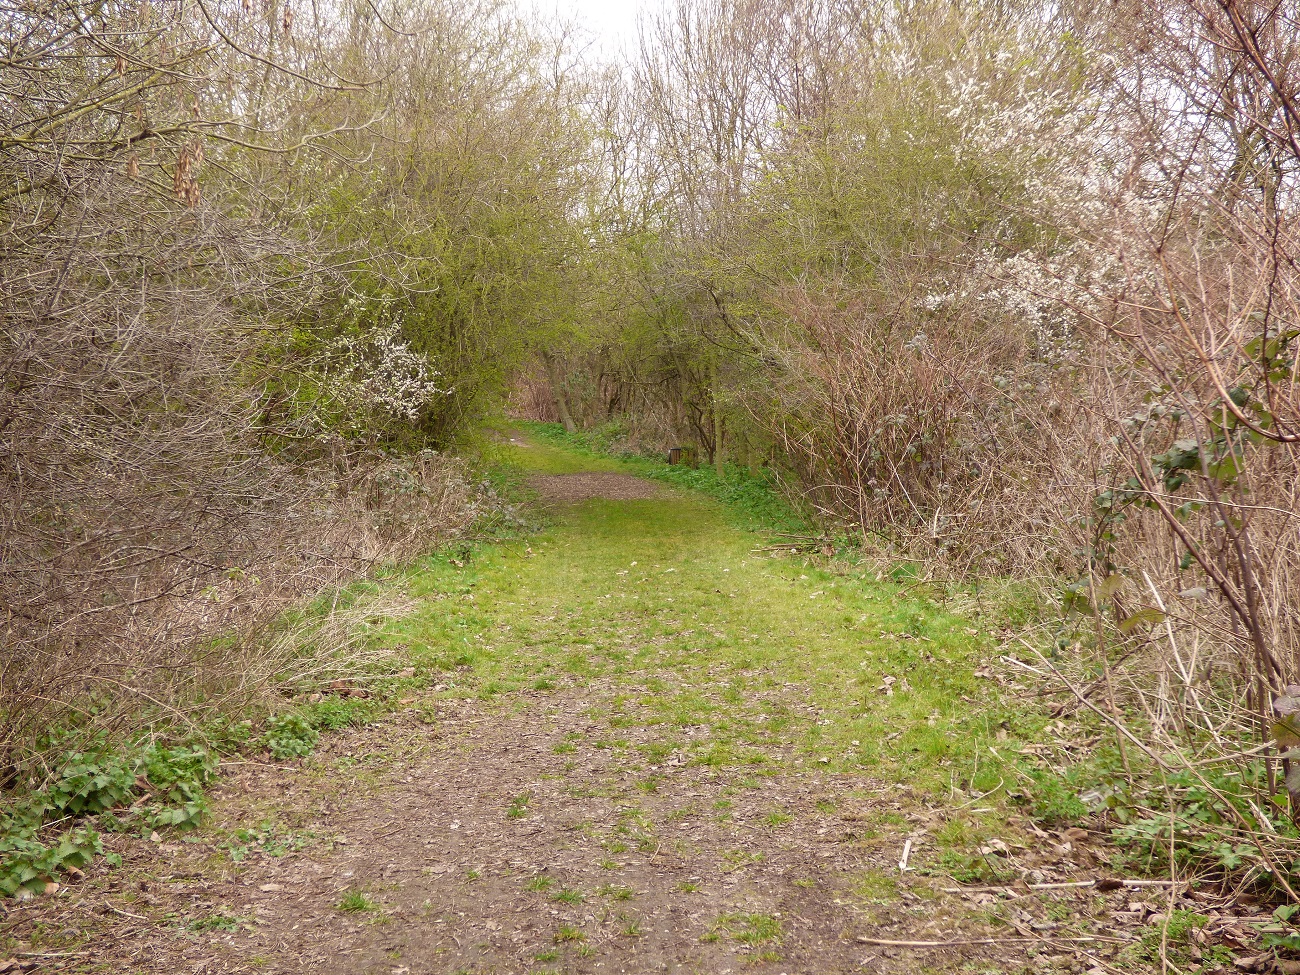 20160323_Haringey_The-Paddock-Community-Nature-Garden_The-Secluded-Path